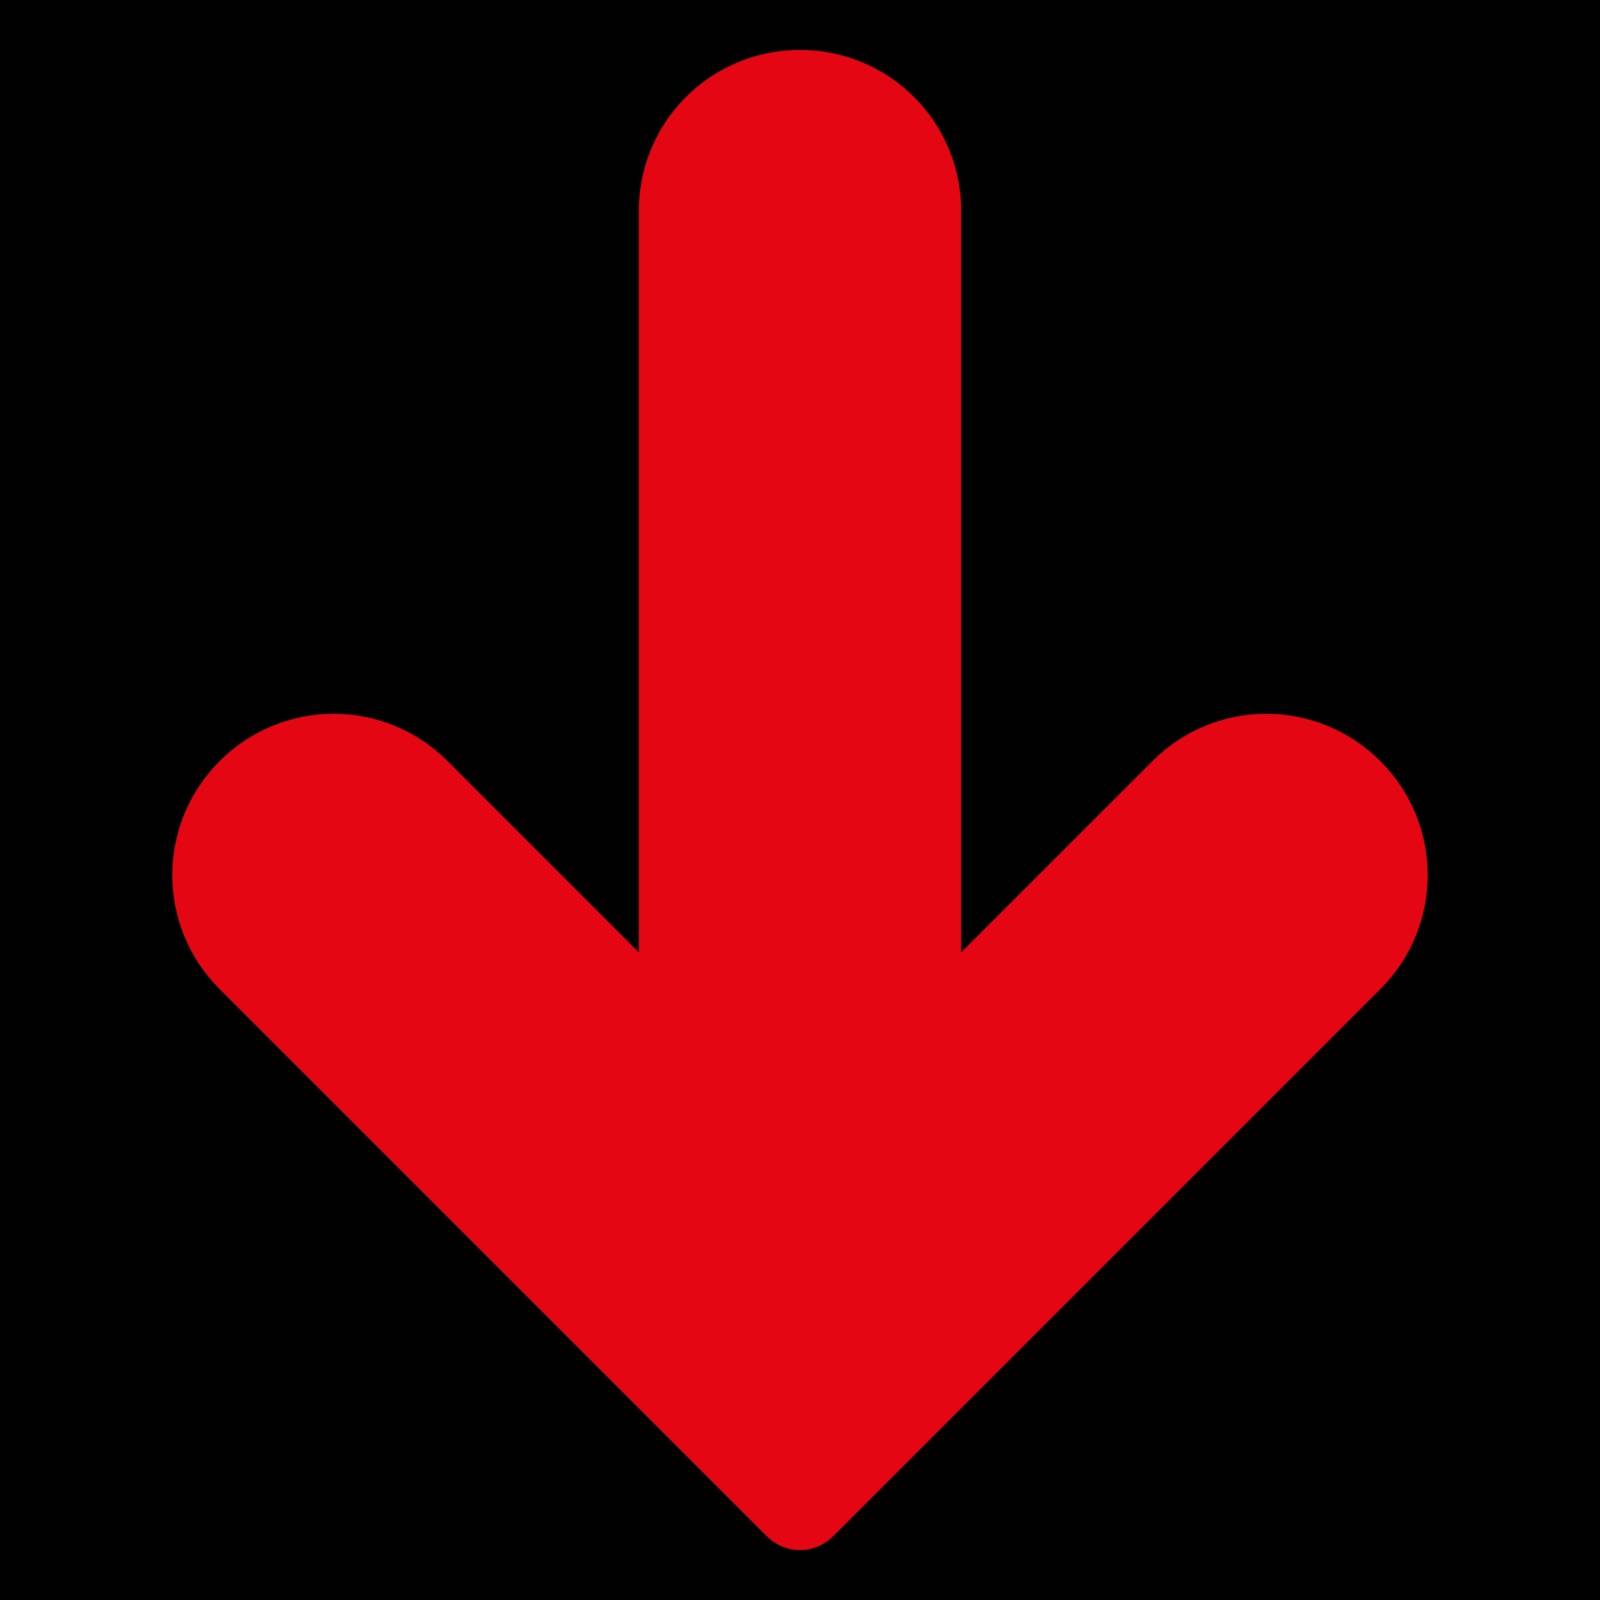 Arrow Down icon from Primitive Set. This isolated flat symbol is drawn with red color on a black background, angles are rounded.